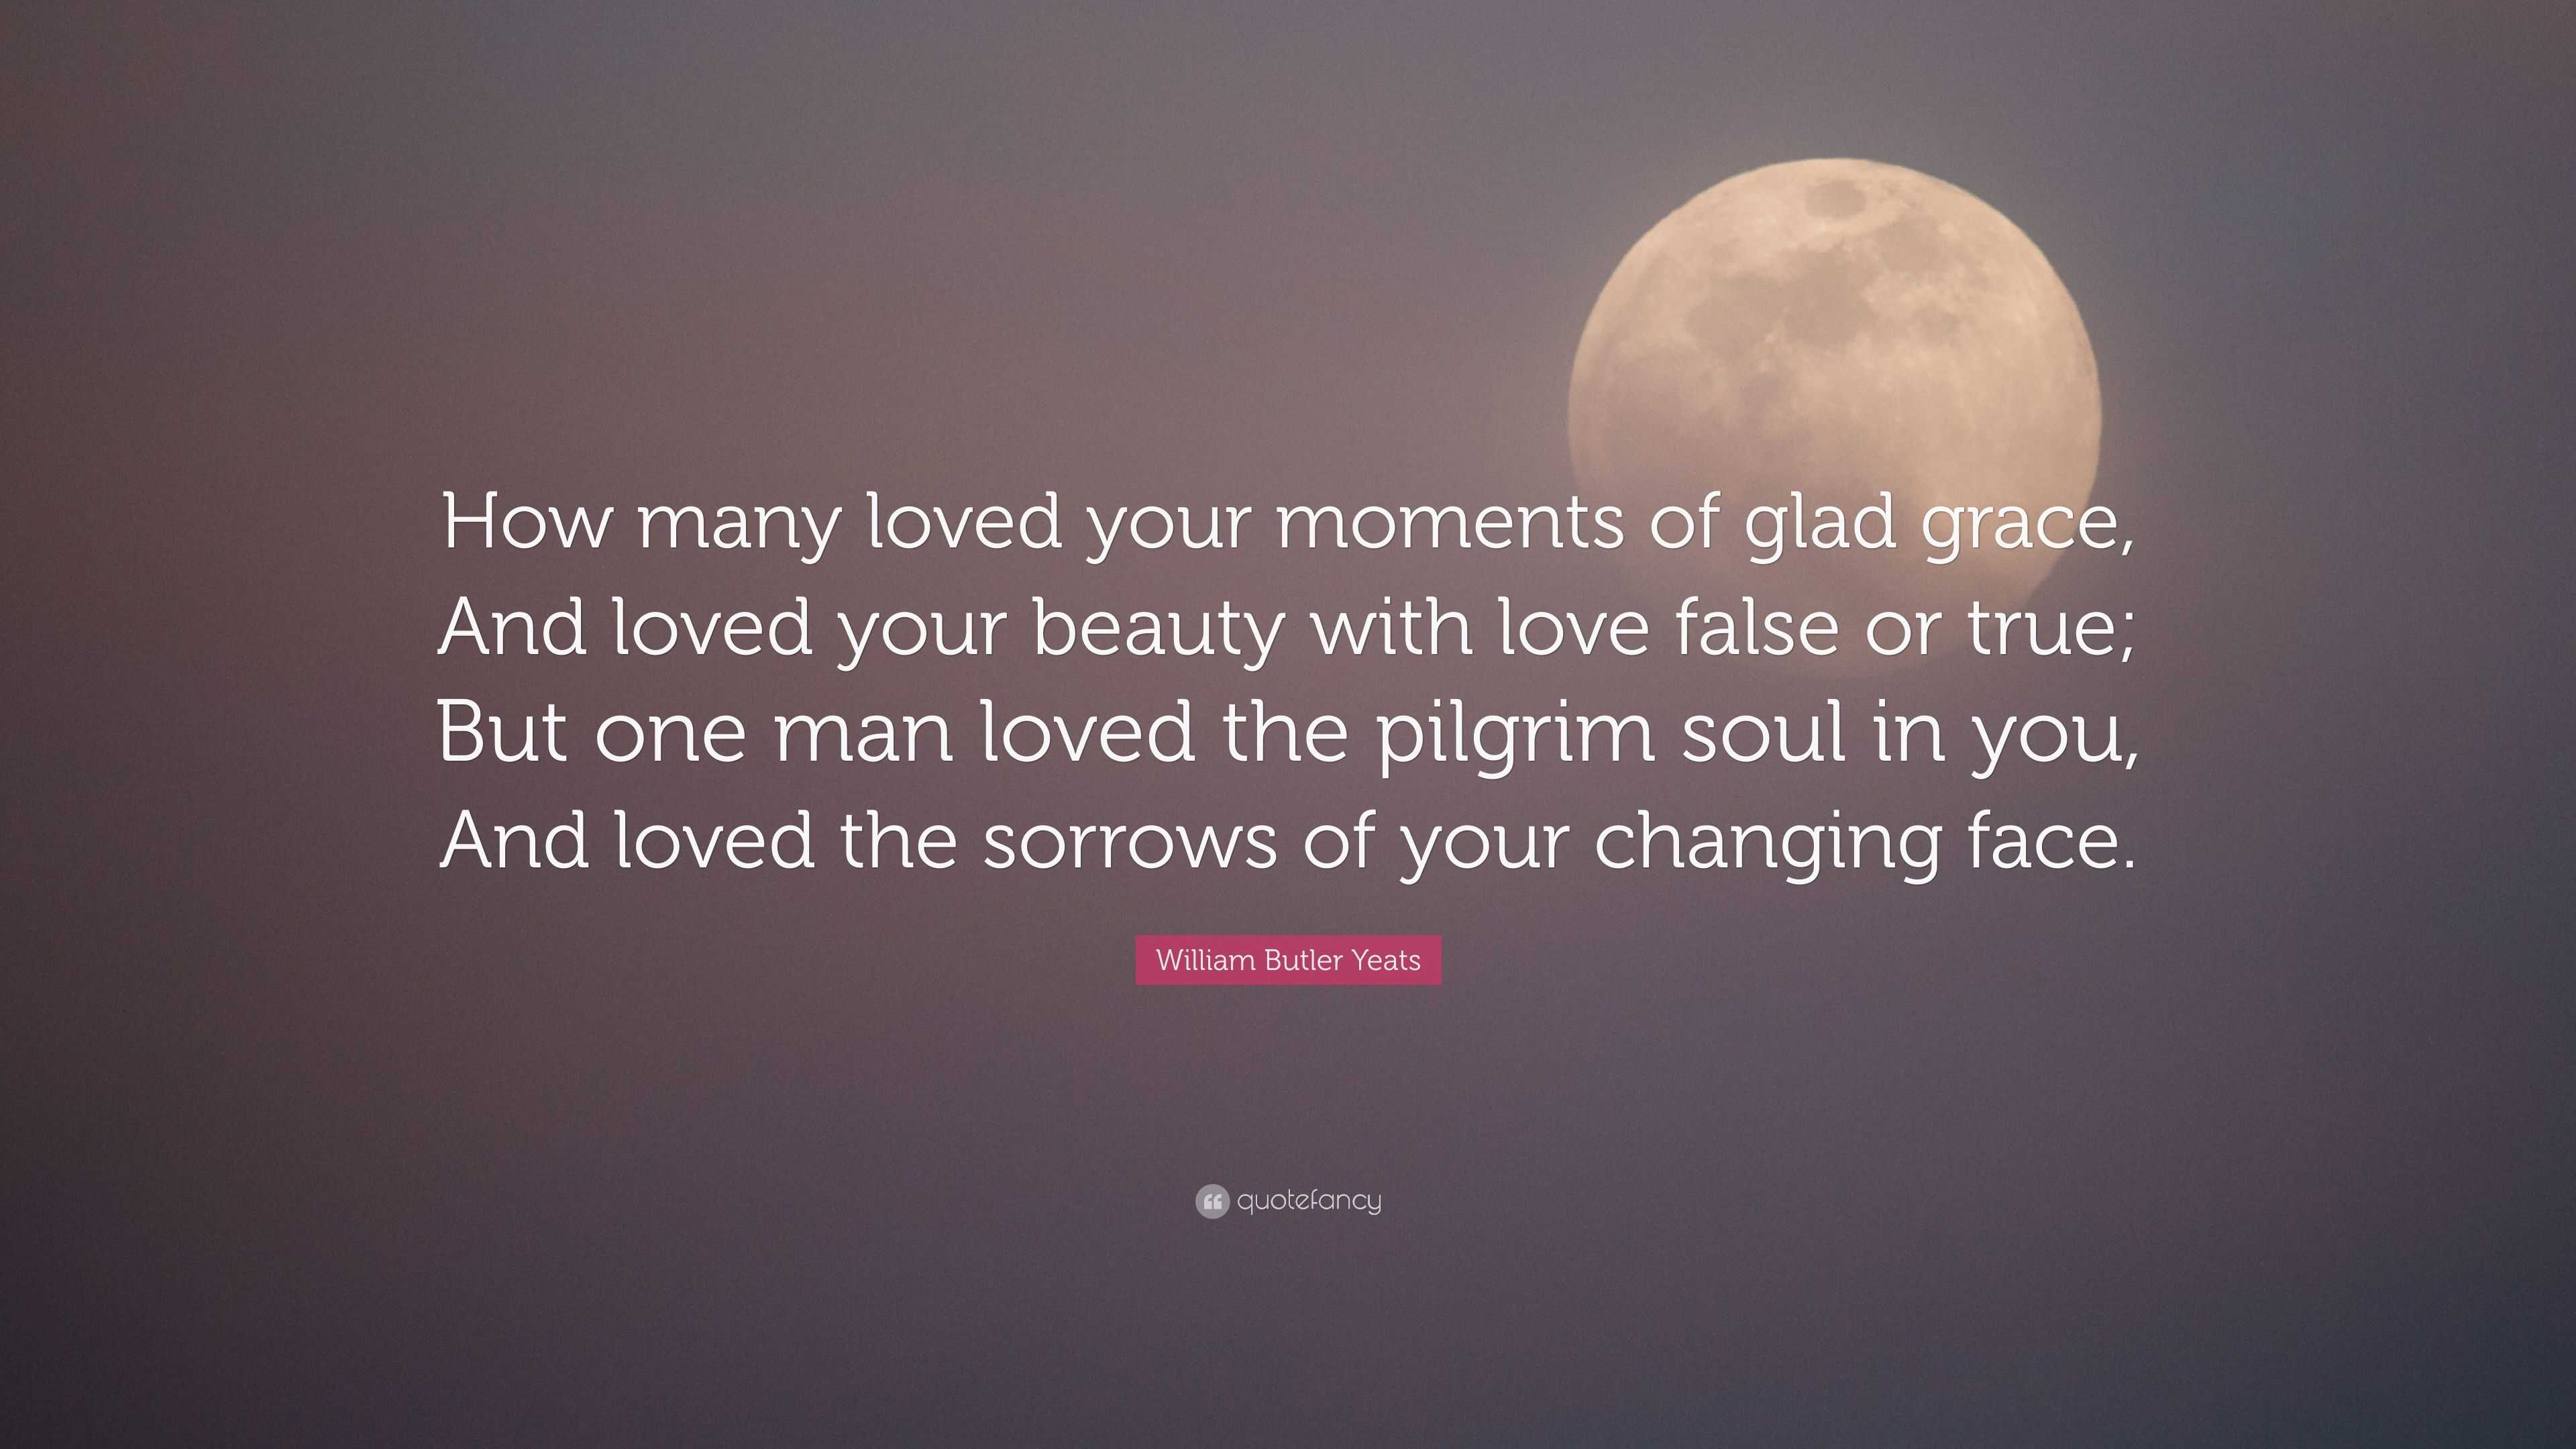 William Butler Yeats Quote: “How many loved your moments of glad grace ...